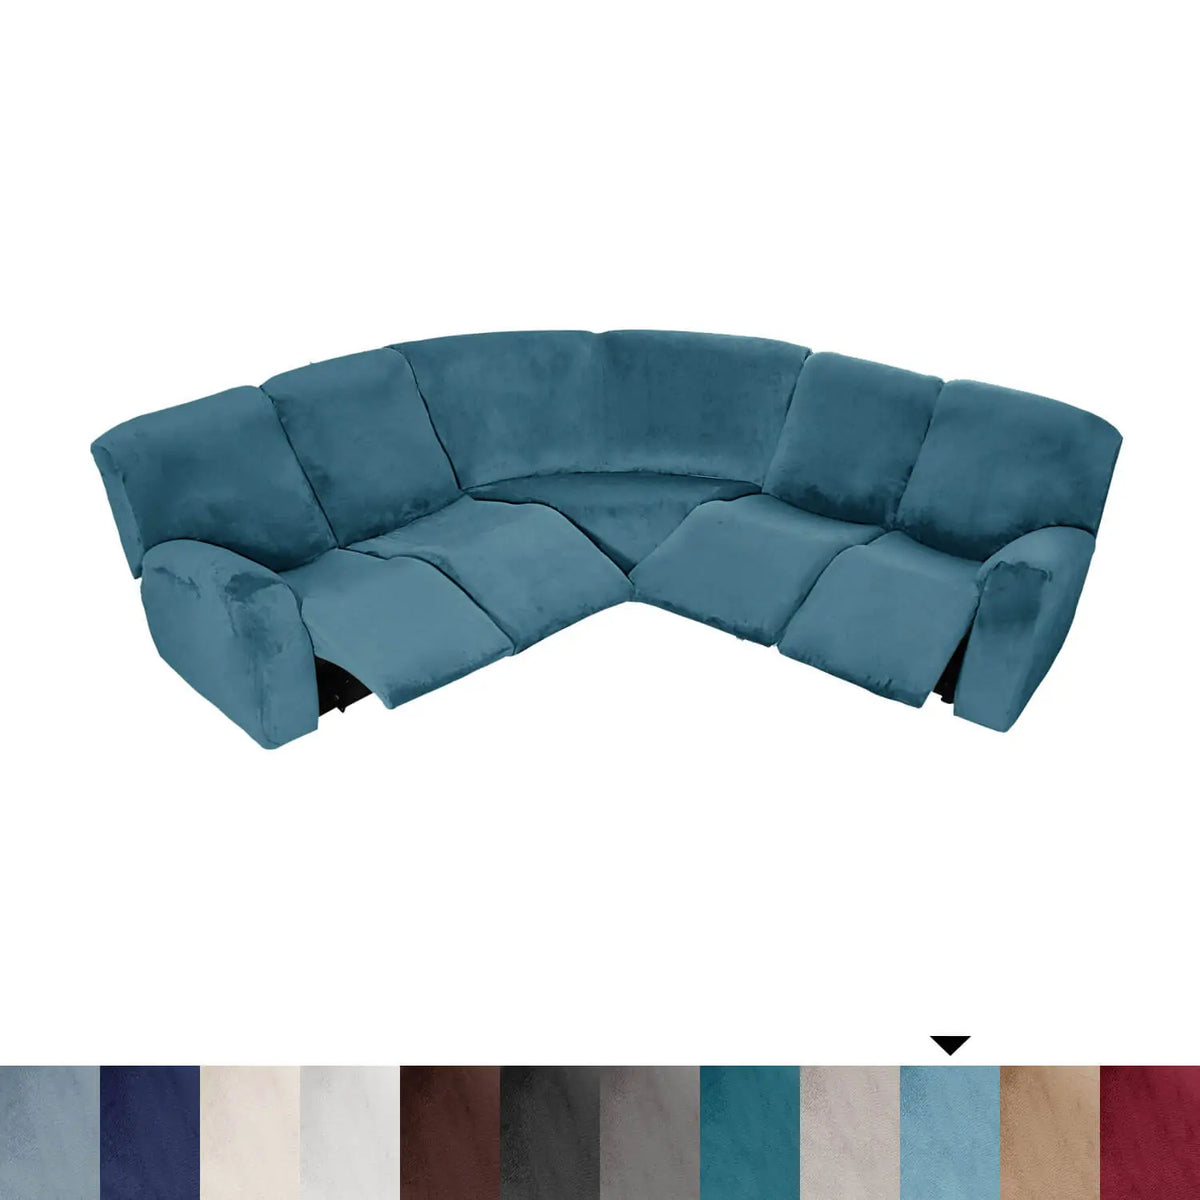 Crfatop 5-seater L Shape Sofa Cover with Recliner Teal